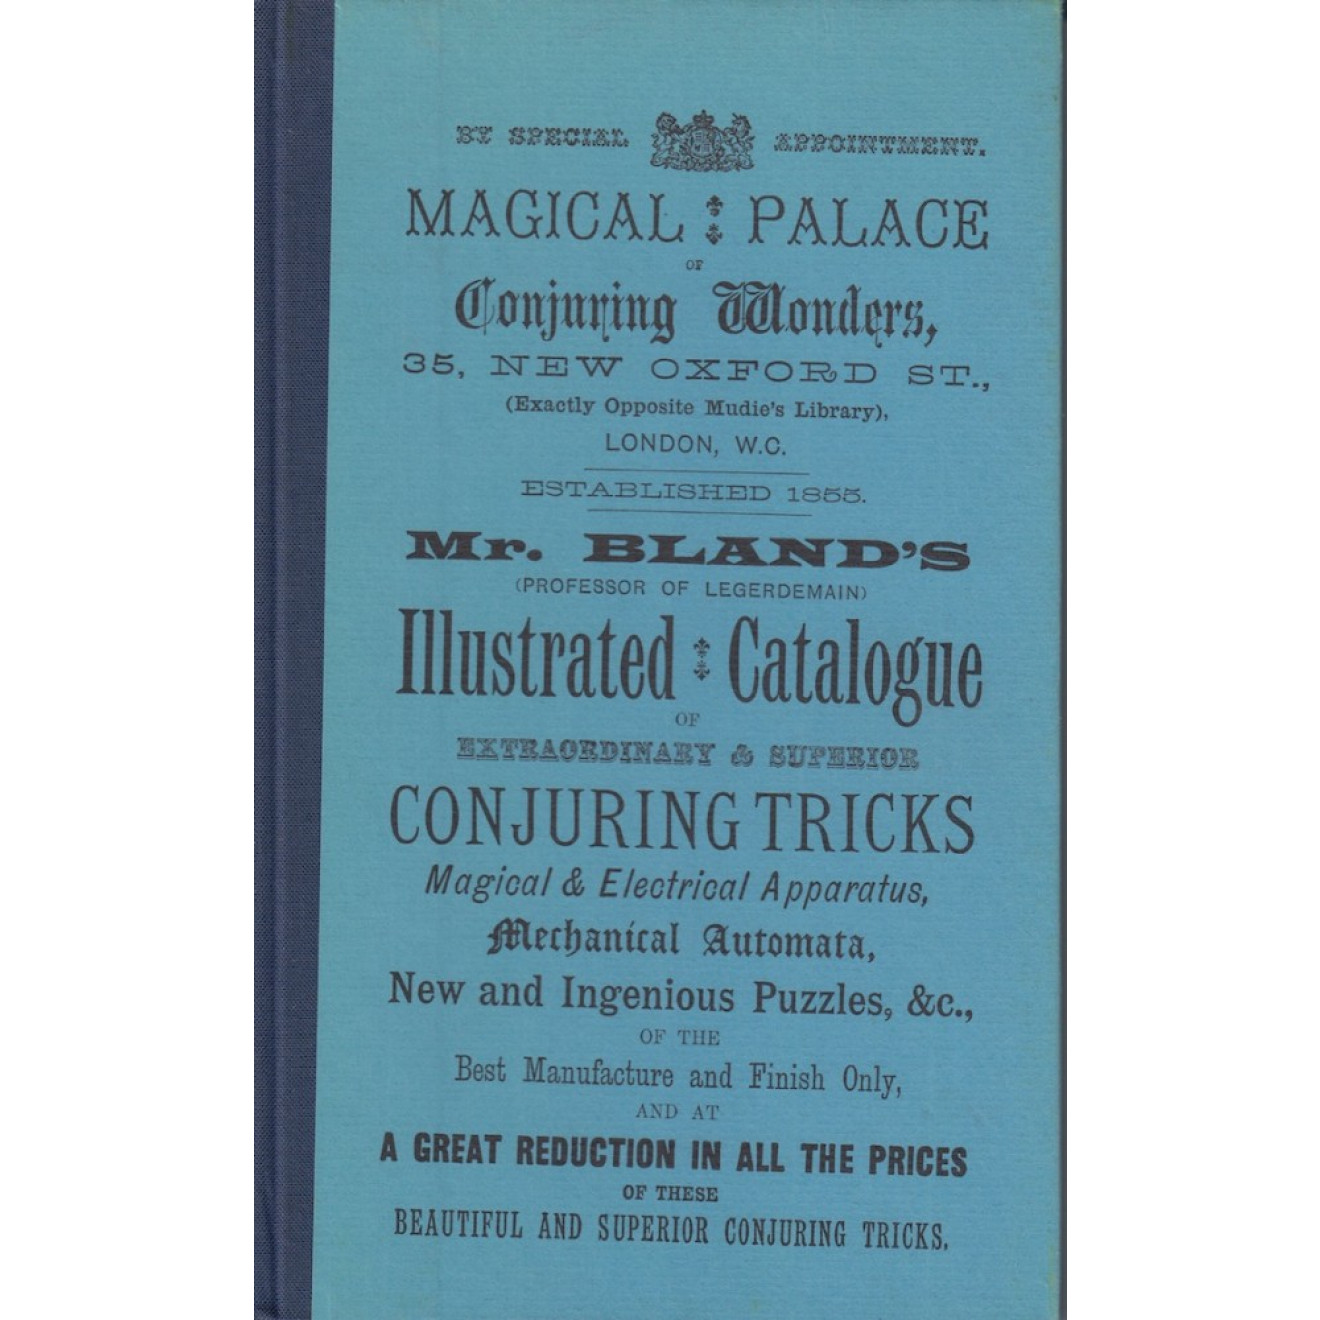 Mr. Bland's Illustrated Catalogue of Conjuring Tricks